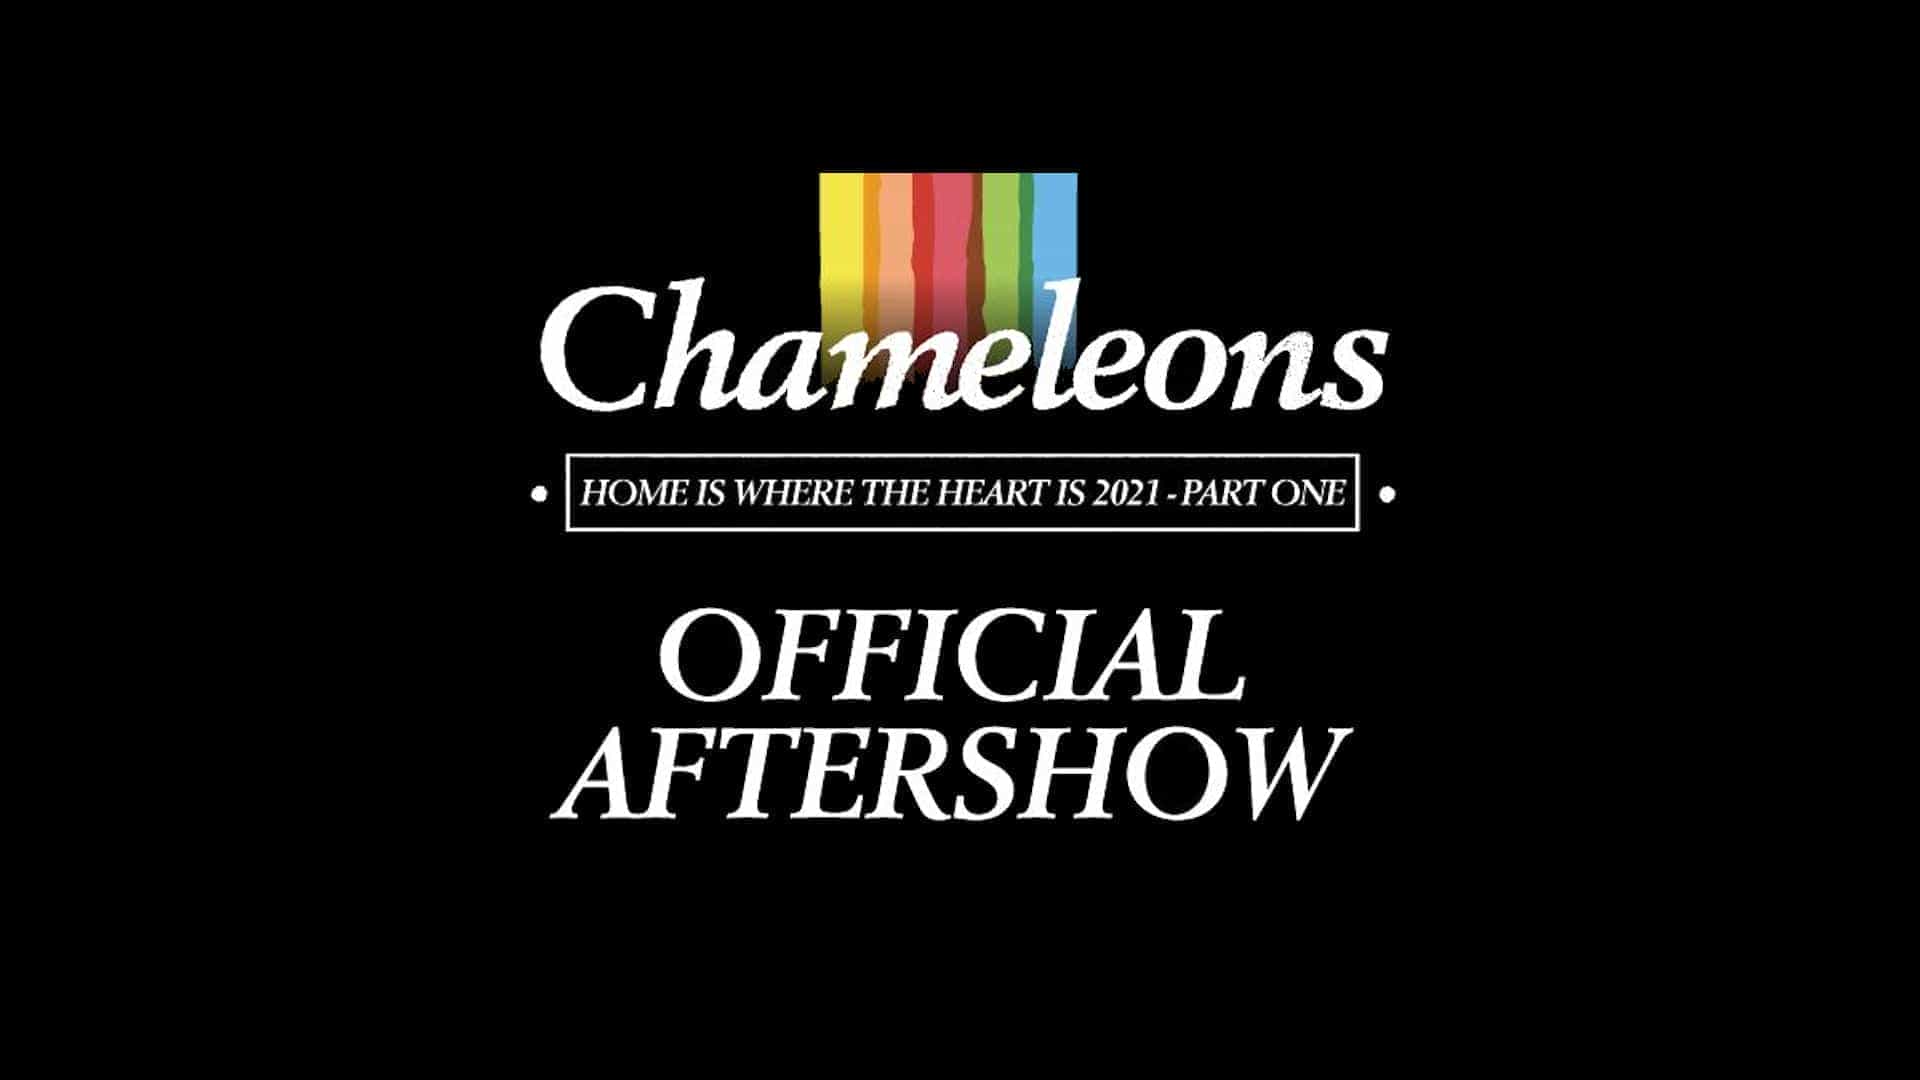 Chameleons Official After Show Party